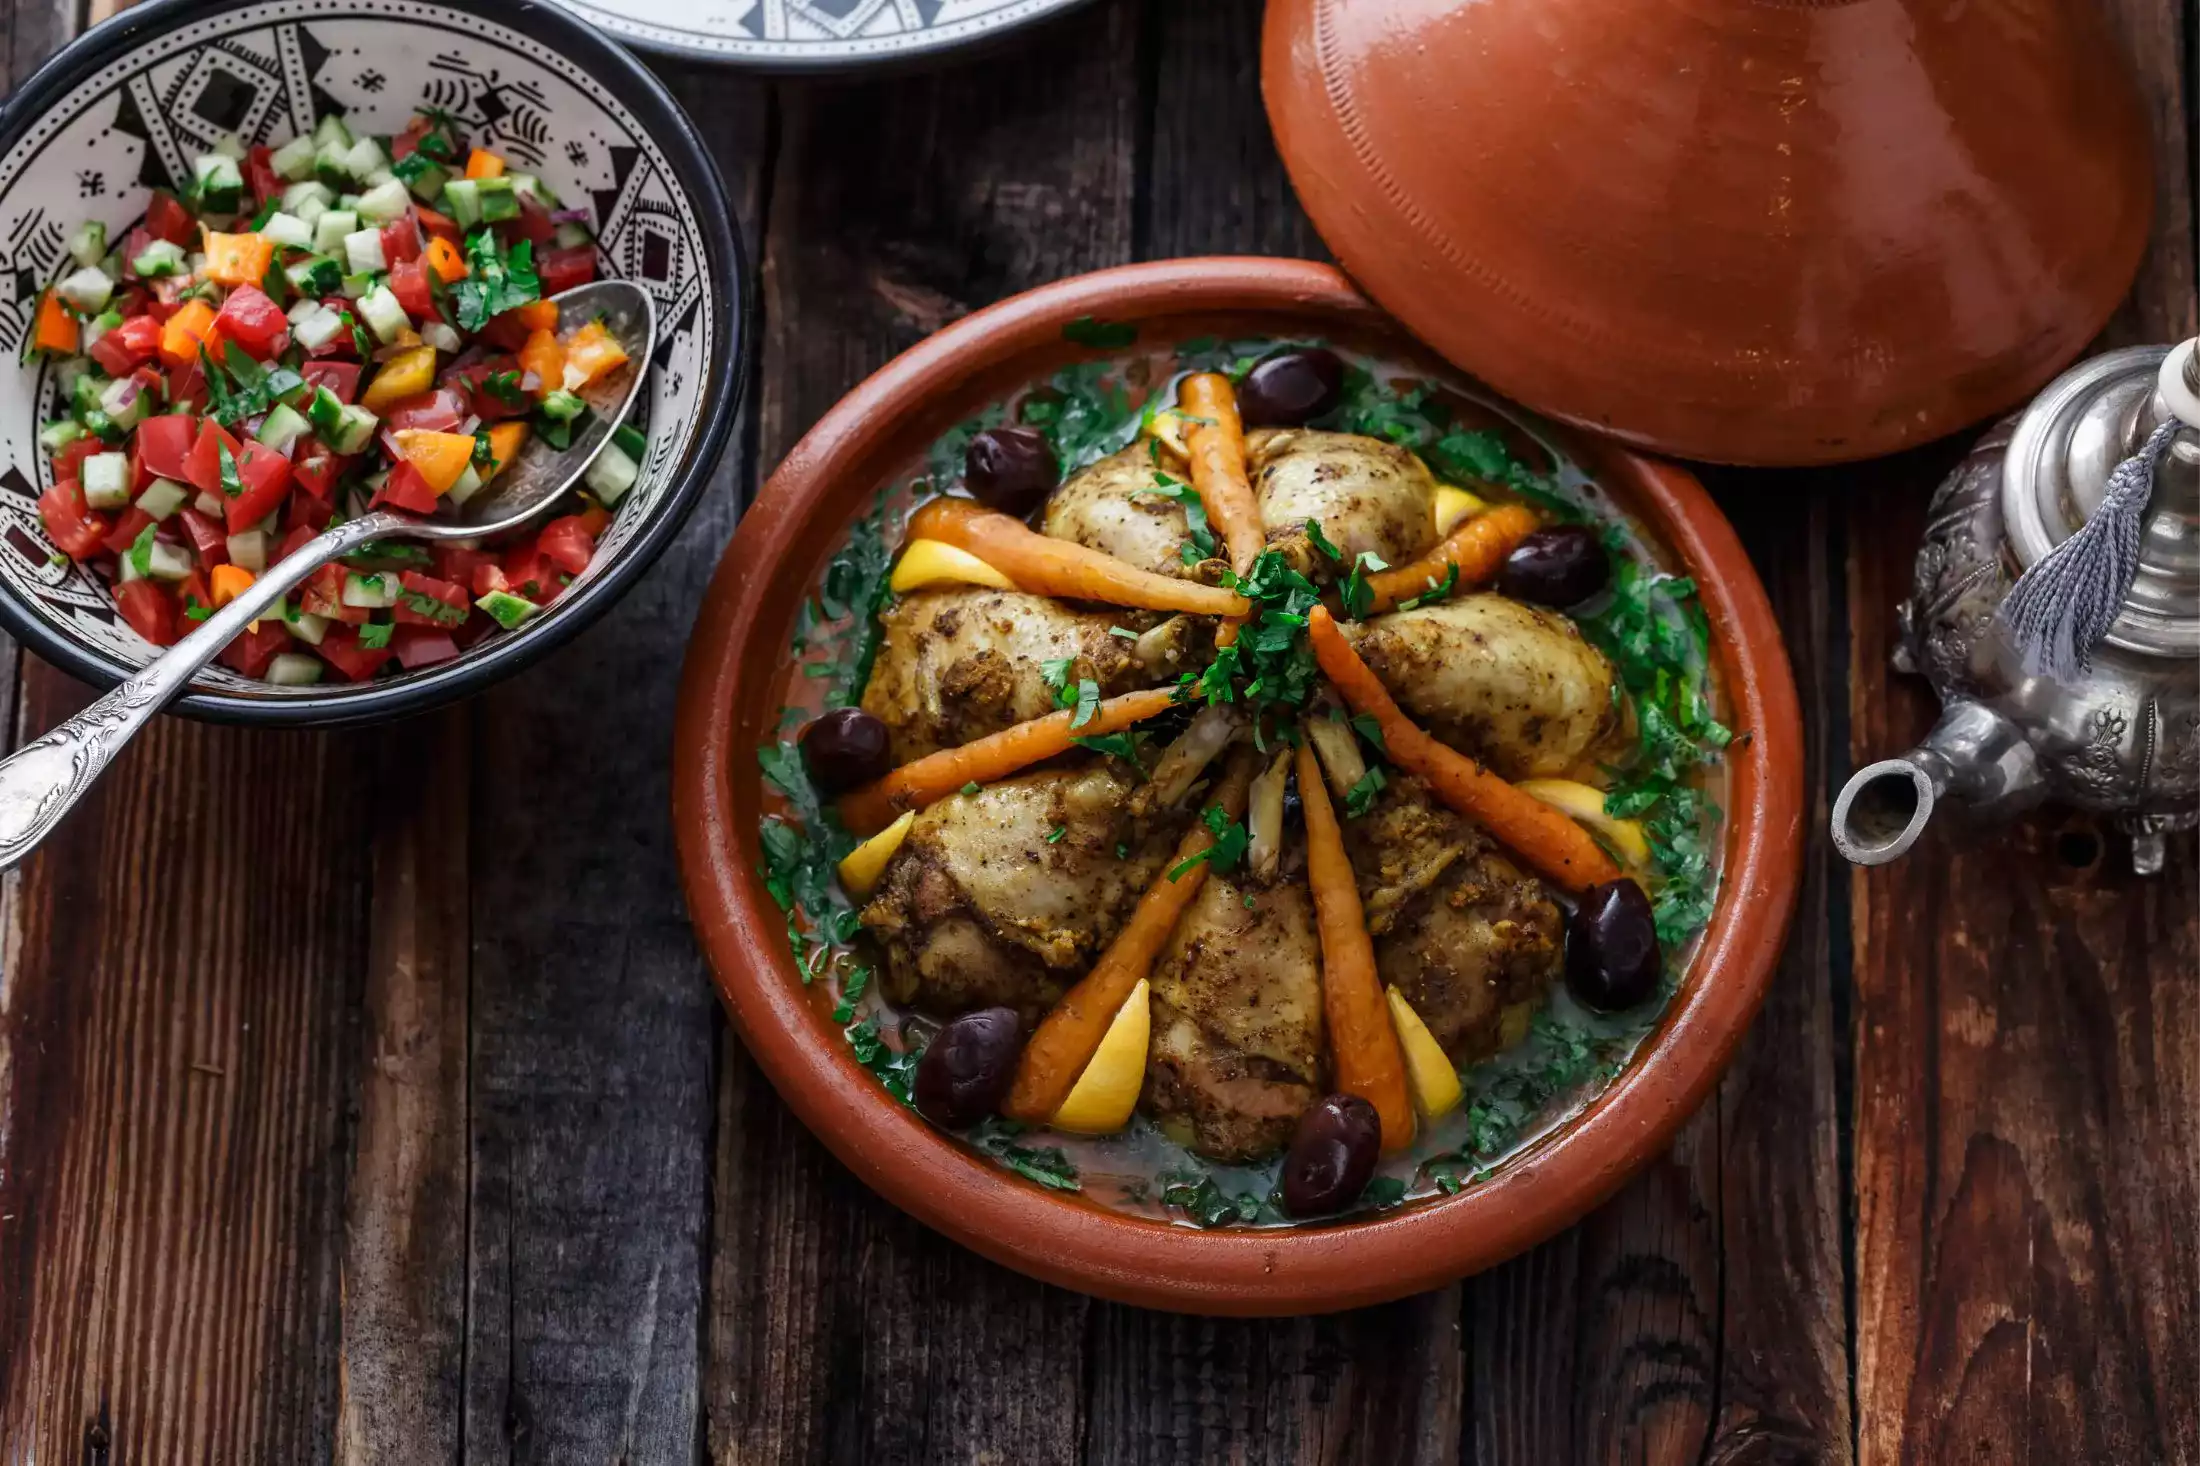 Traditional Moroccan food served in an authentic ceramic bowl made in Morocco